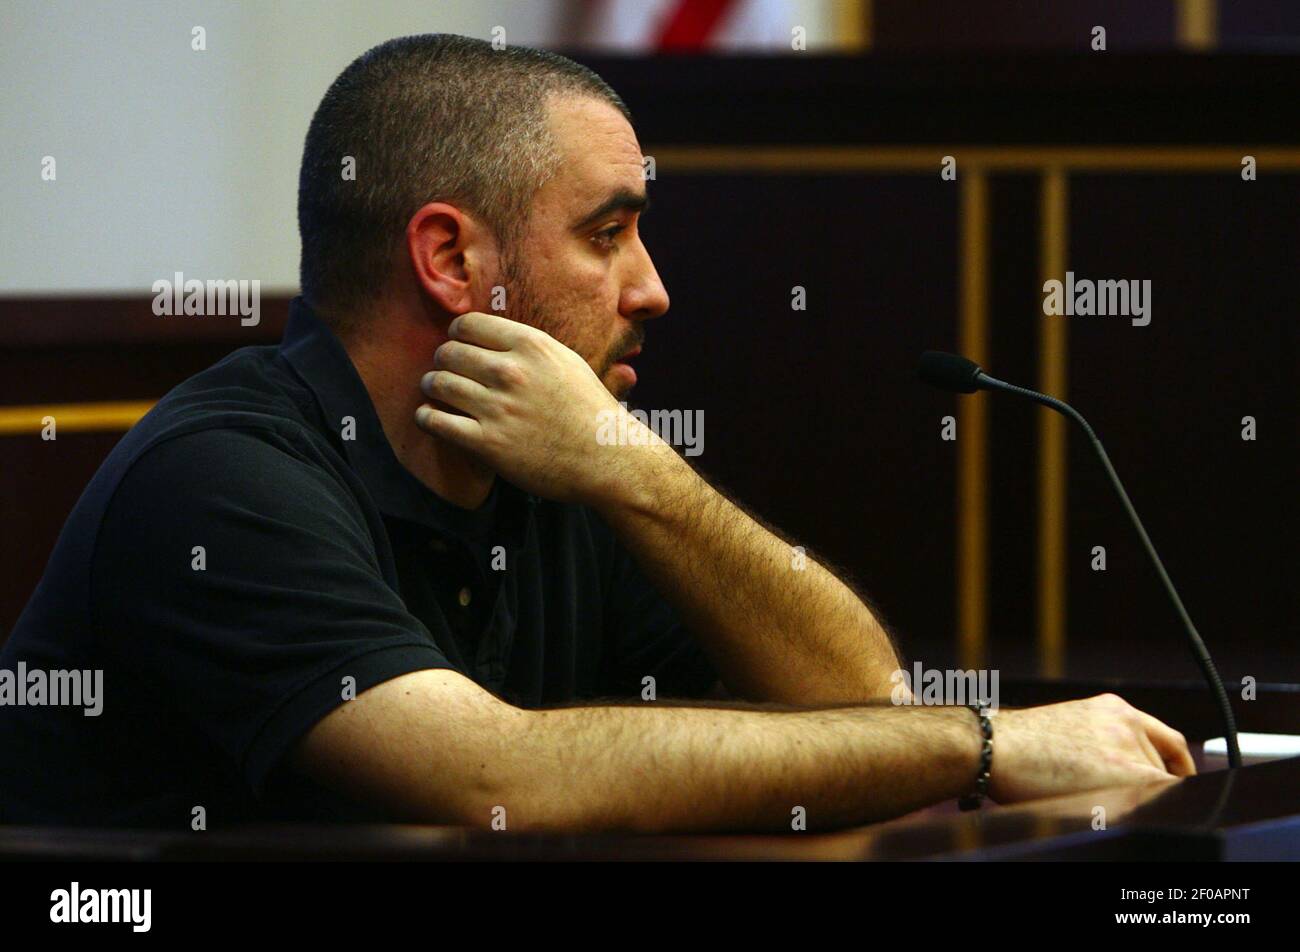 Lee Anthony, brother of Casey Anthony, testifies during a hearing at the  Orange County Courthouse in Orlando, Florida, Thursday, March 3, 2011.  Casey Anthony is accused of killing her 2-year-old daughter, Caylee